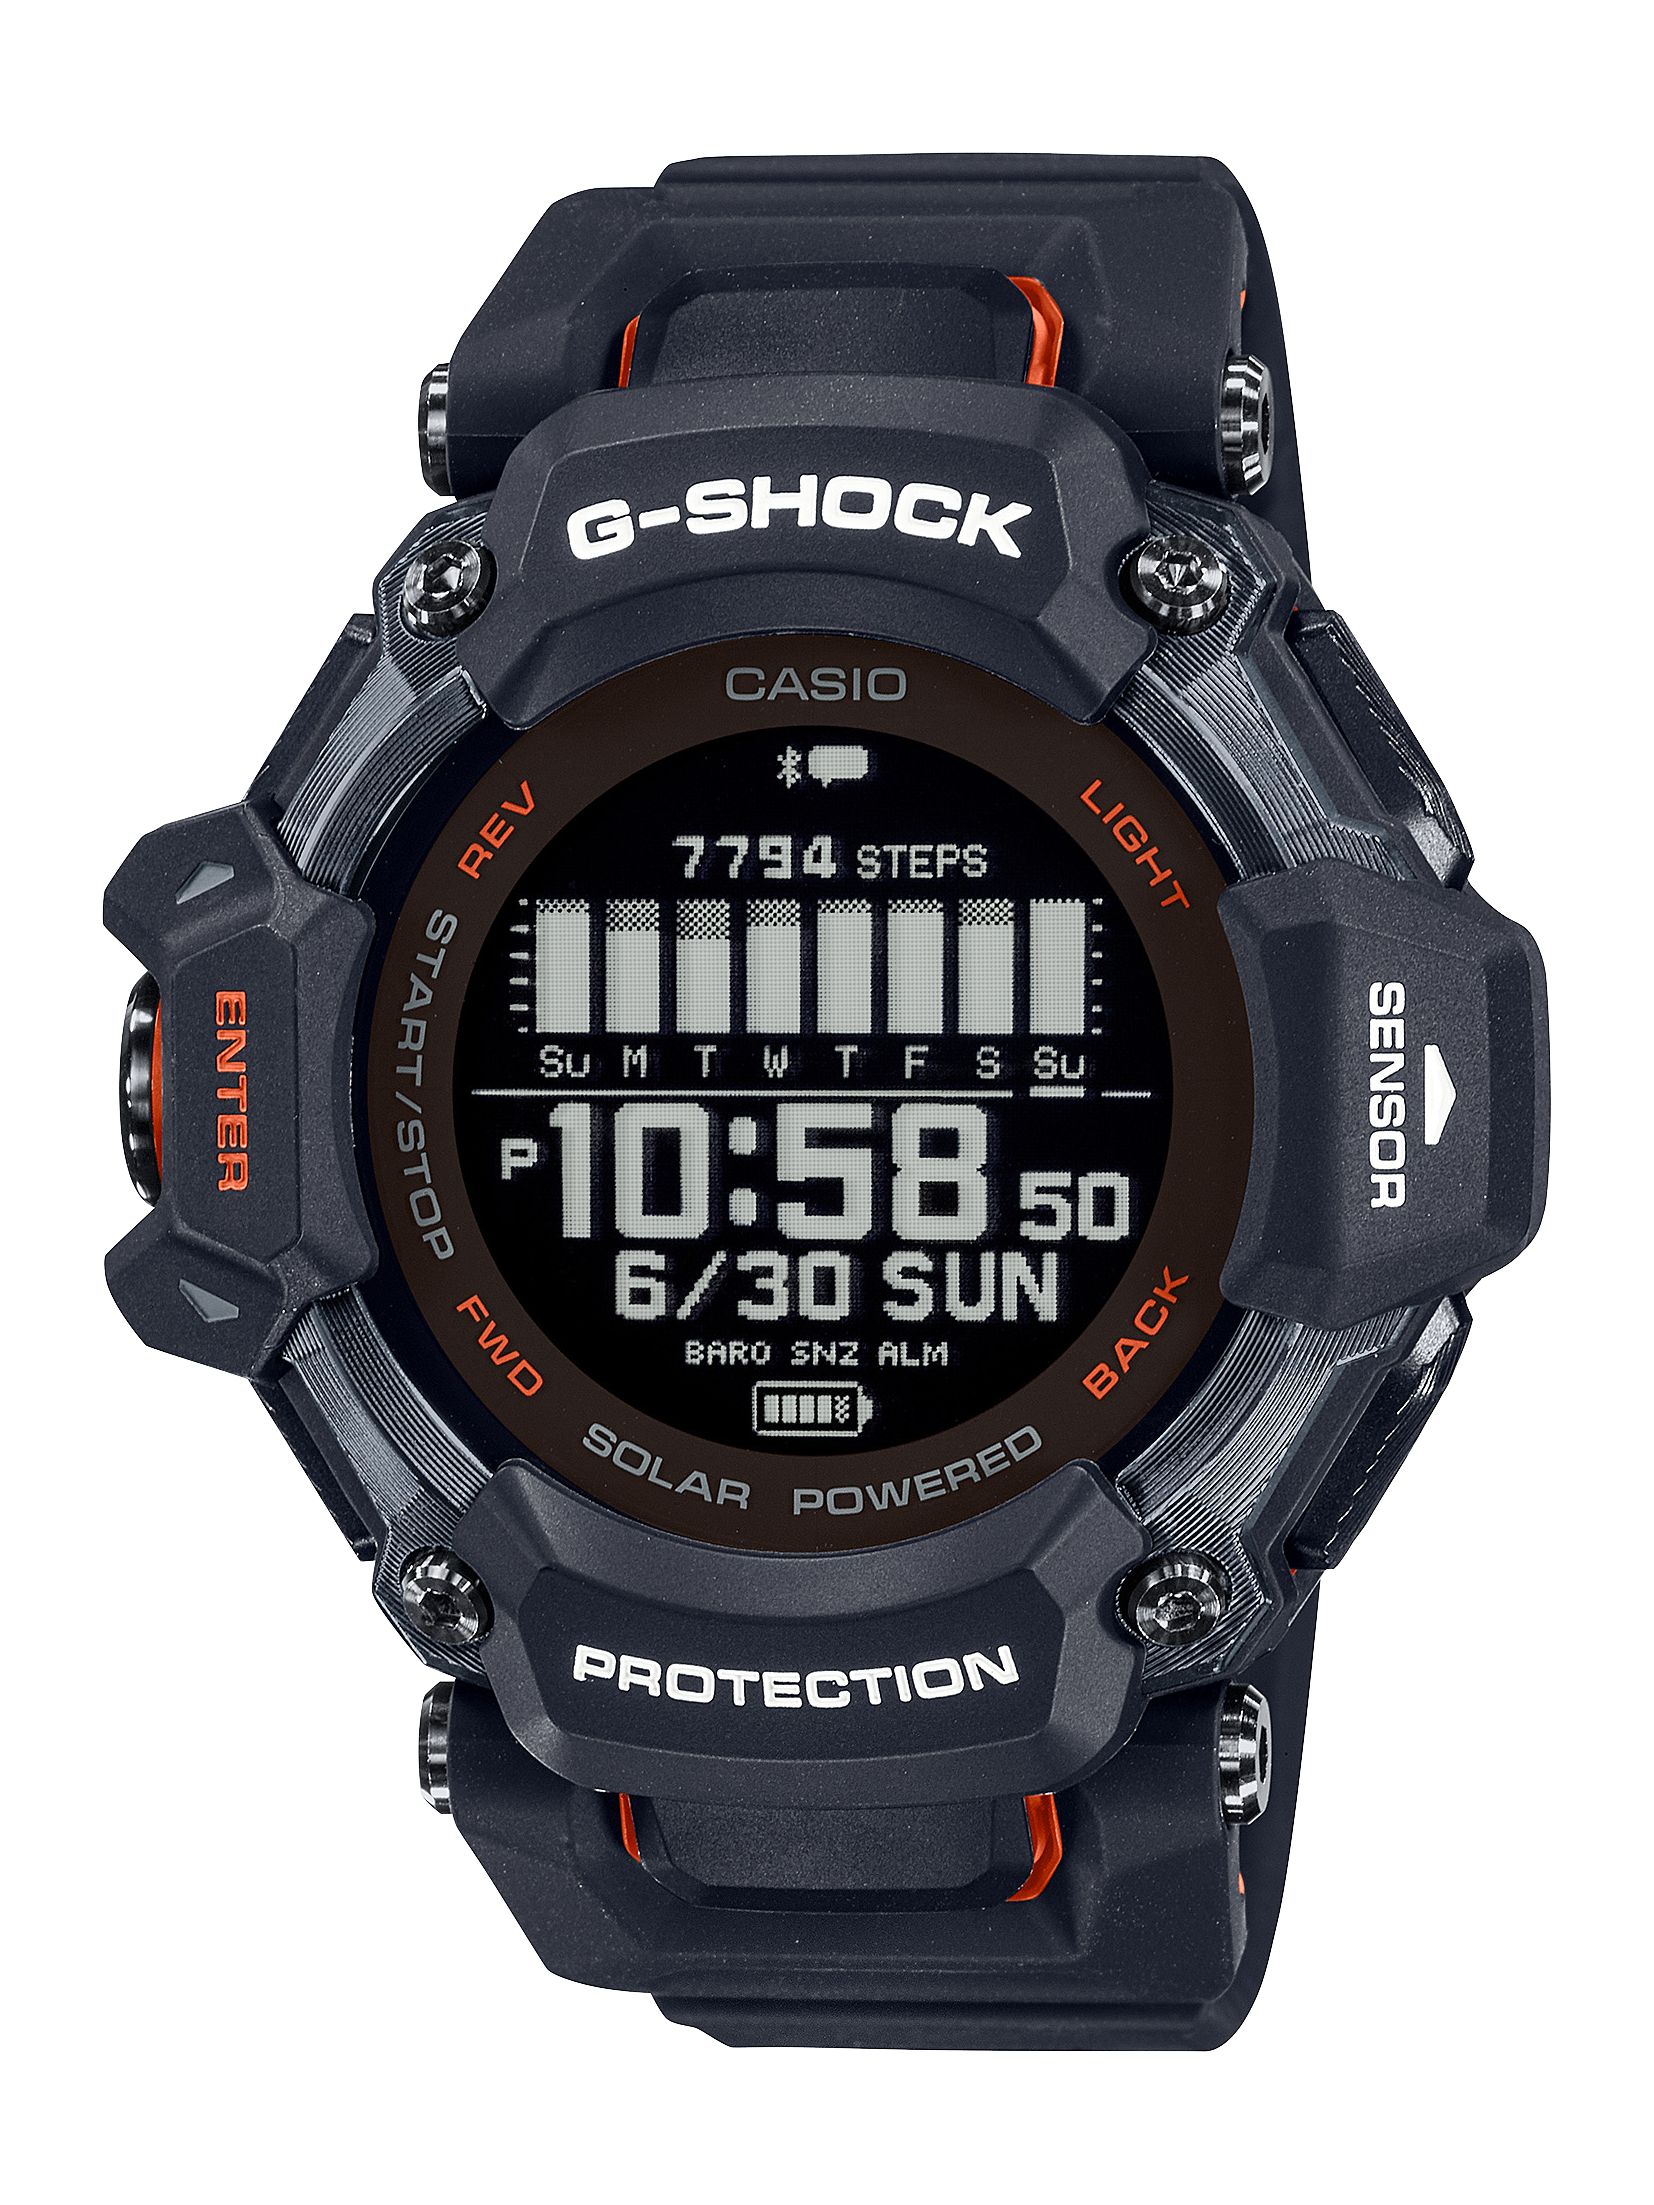 Casio G-SHOCK MOVE DWH5600 smartwatch now available in US -   News